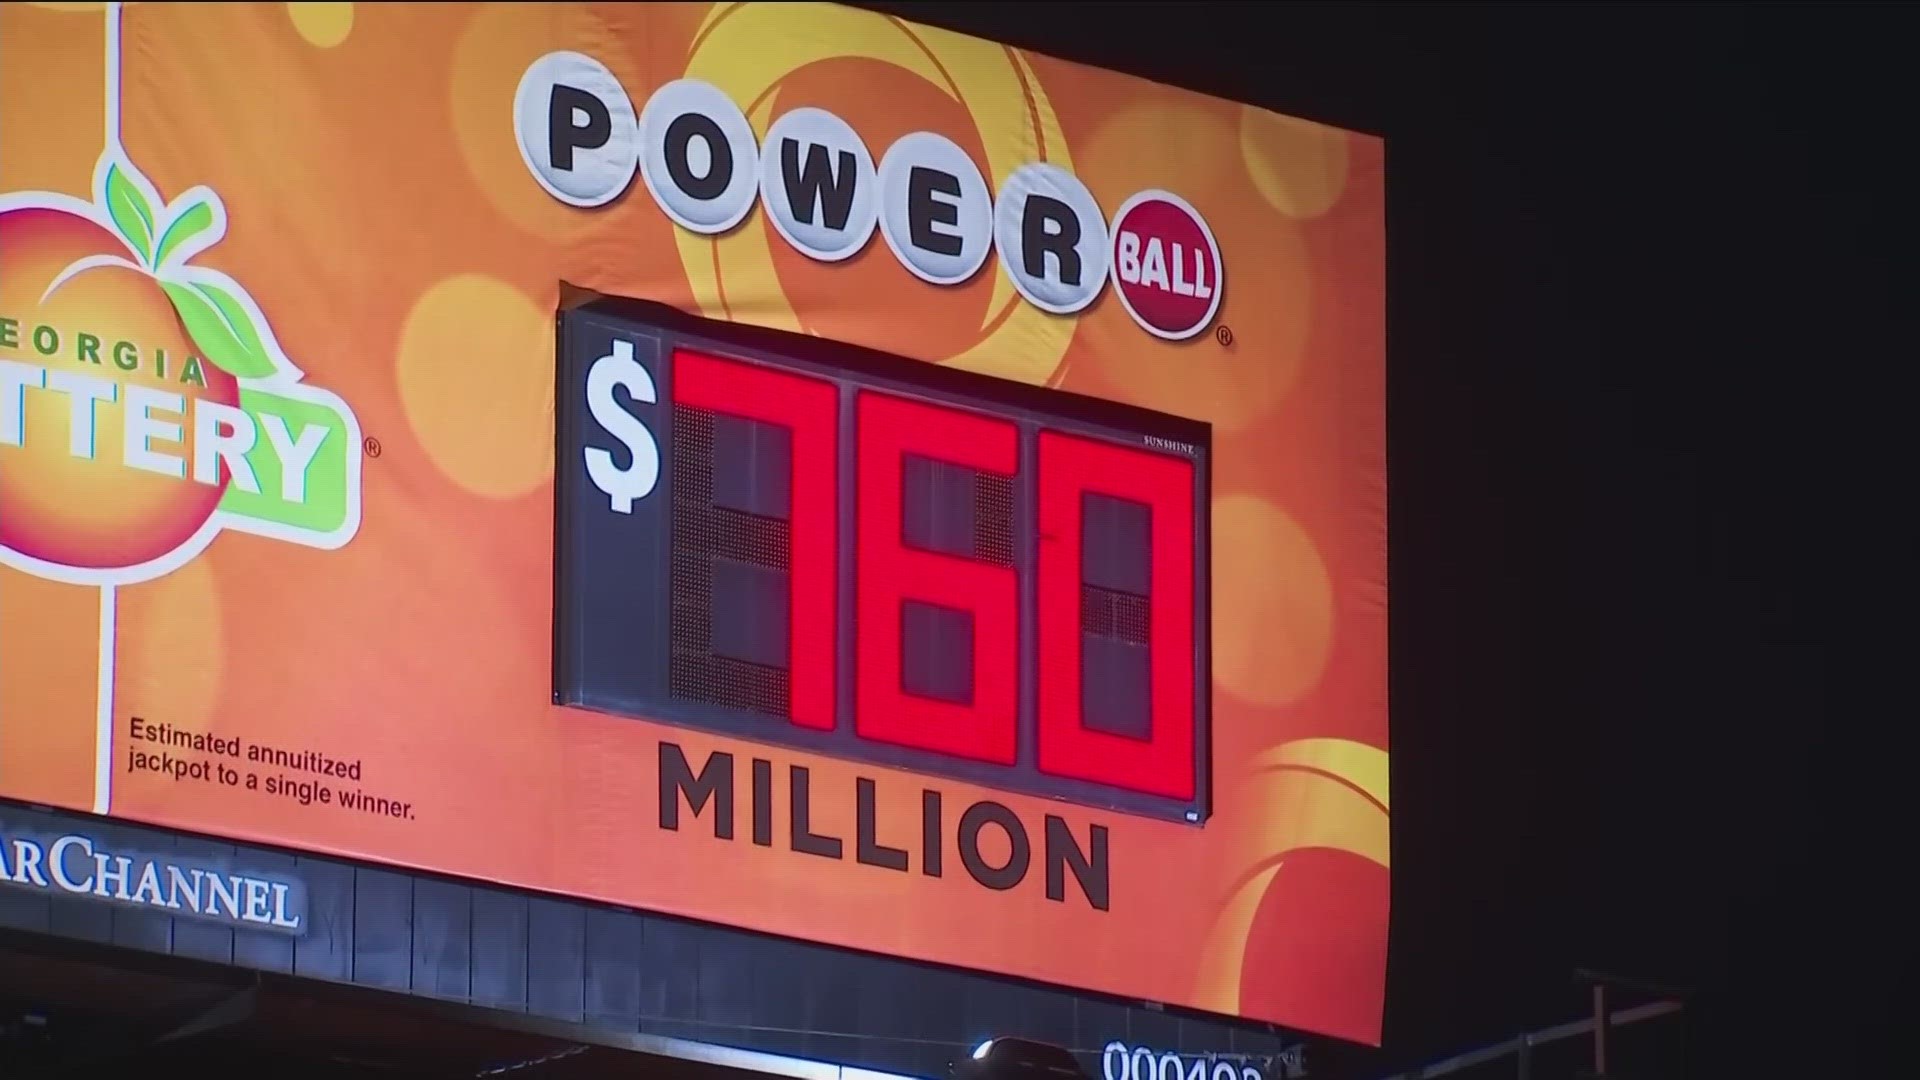 The winning numbers were 4, 11, 38, 51, and 68, with a red Powerball number of 5. The "Power Play" multiplier in effect was 3x.